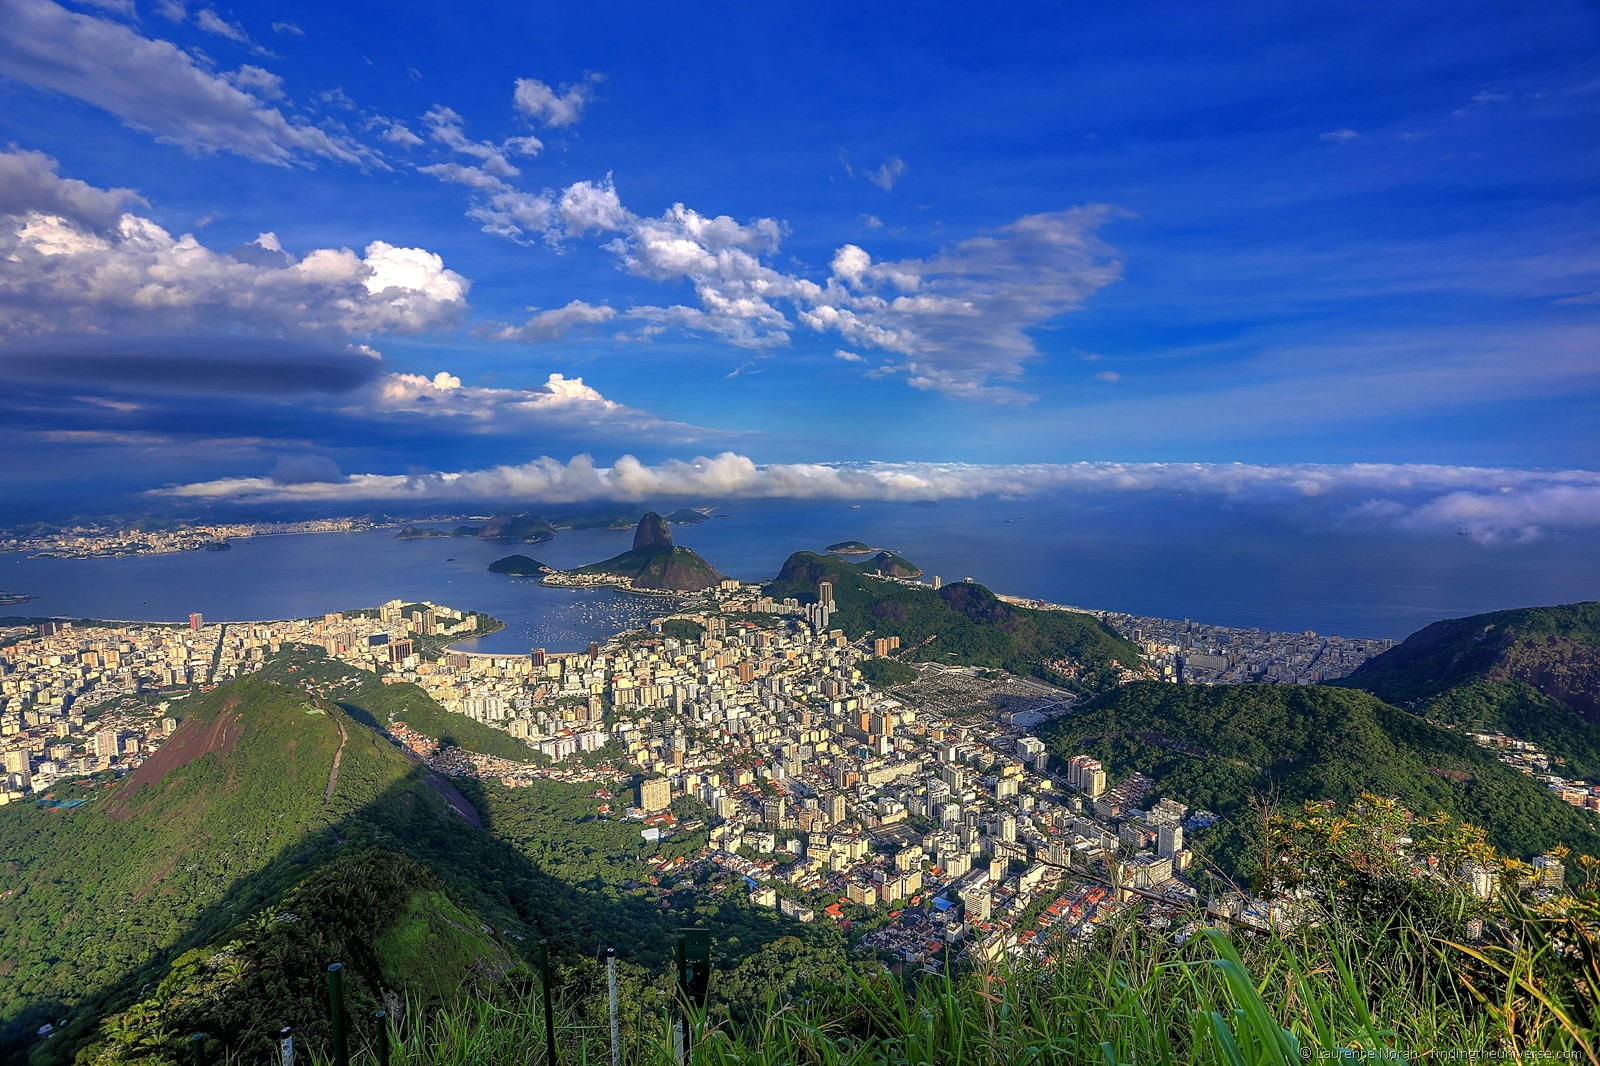 [View%2520of%2520Rio%2520from%2520Christ%2520the%2520Redeemer%2520at%2520sunset%255B3%255D.jpg]